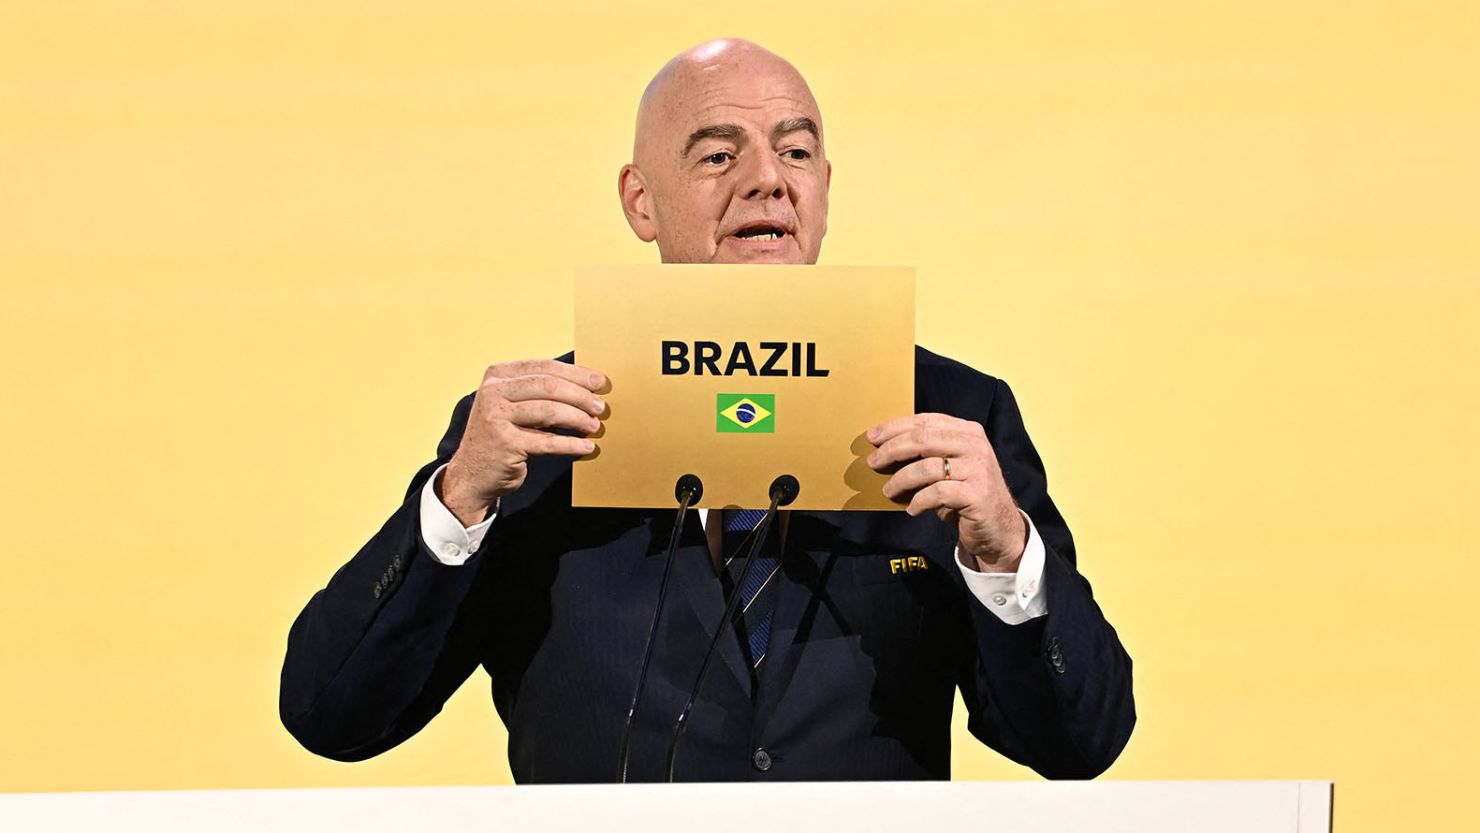 FIFA President Gianni Infantino announces Brazil as the hosts of the 2027 Women's World Cup during the 74th FIFA Congress in Bangkok, Thailand.